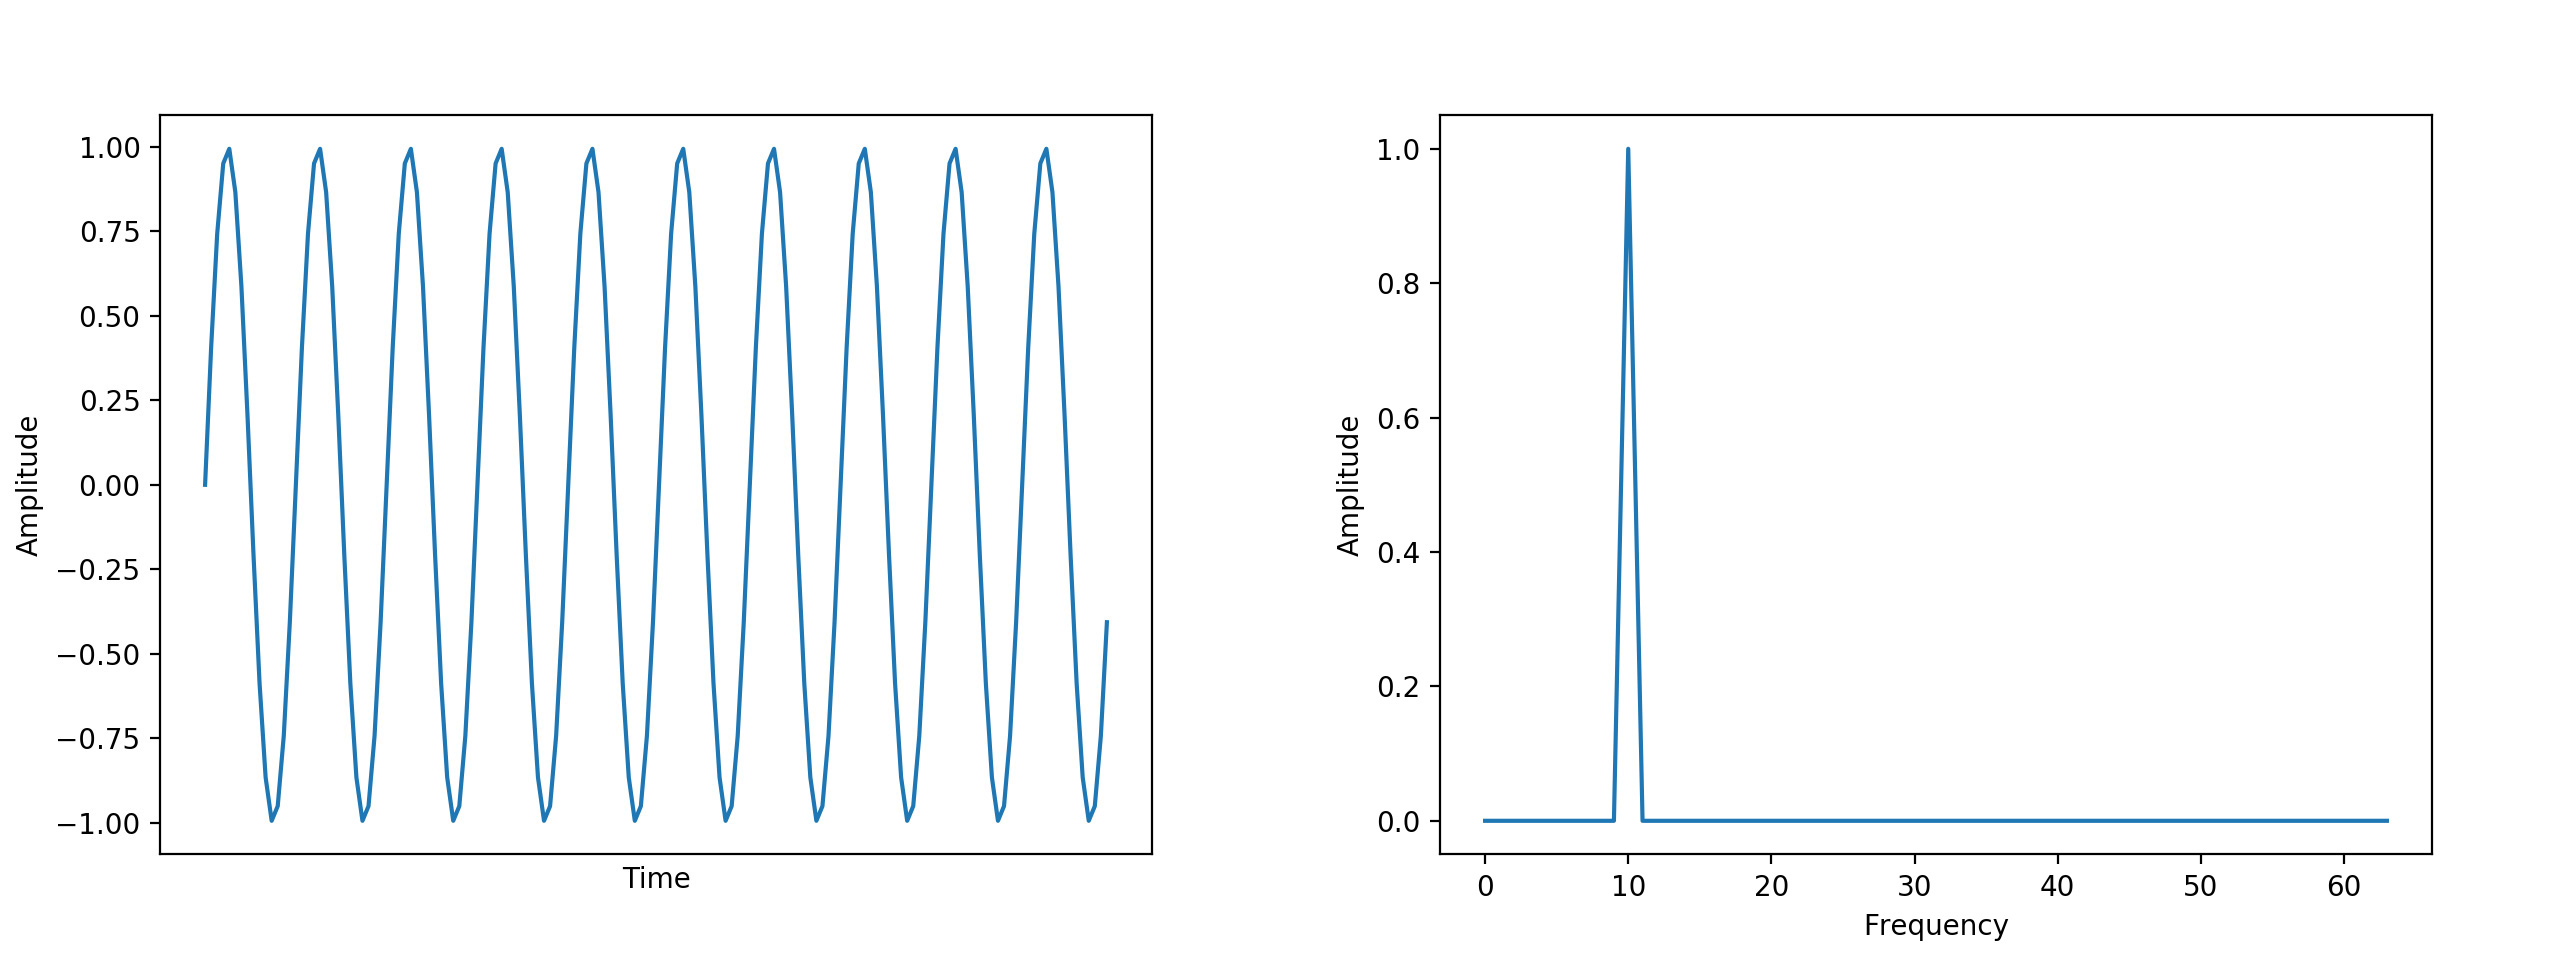 Figure 2: 10 Hz sinusoidal wave in the time domain (left) and frequency domain (right).